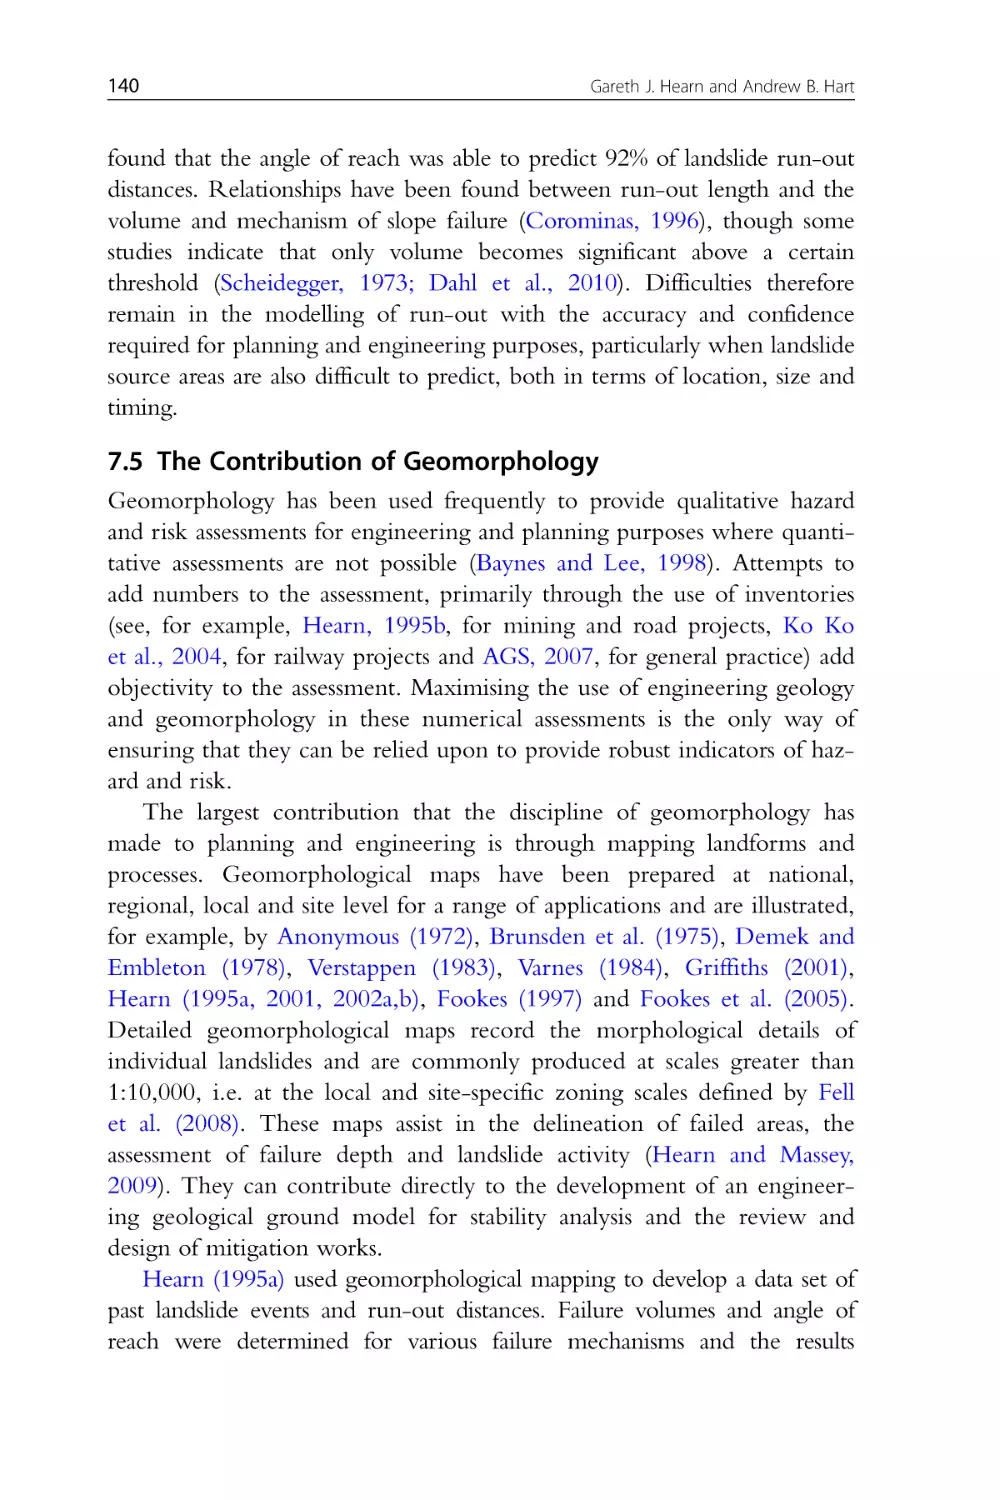 7.5 The Contribution of Geomorphology